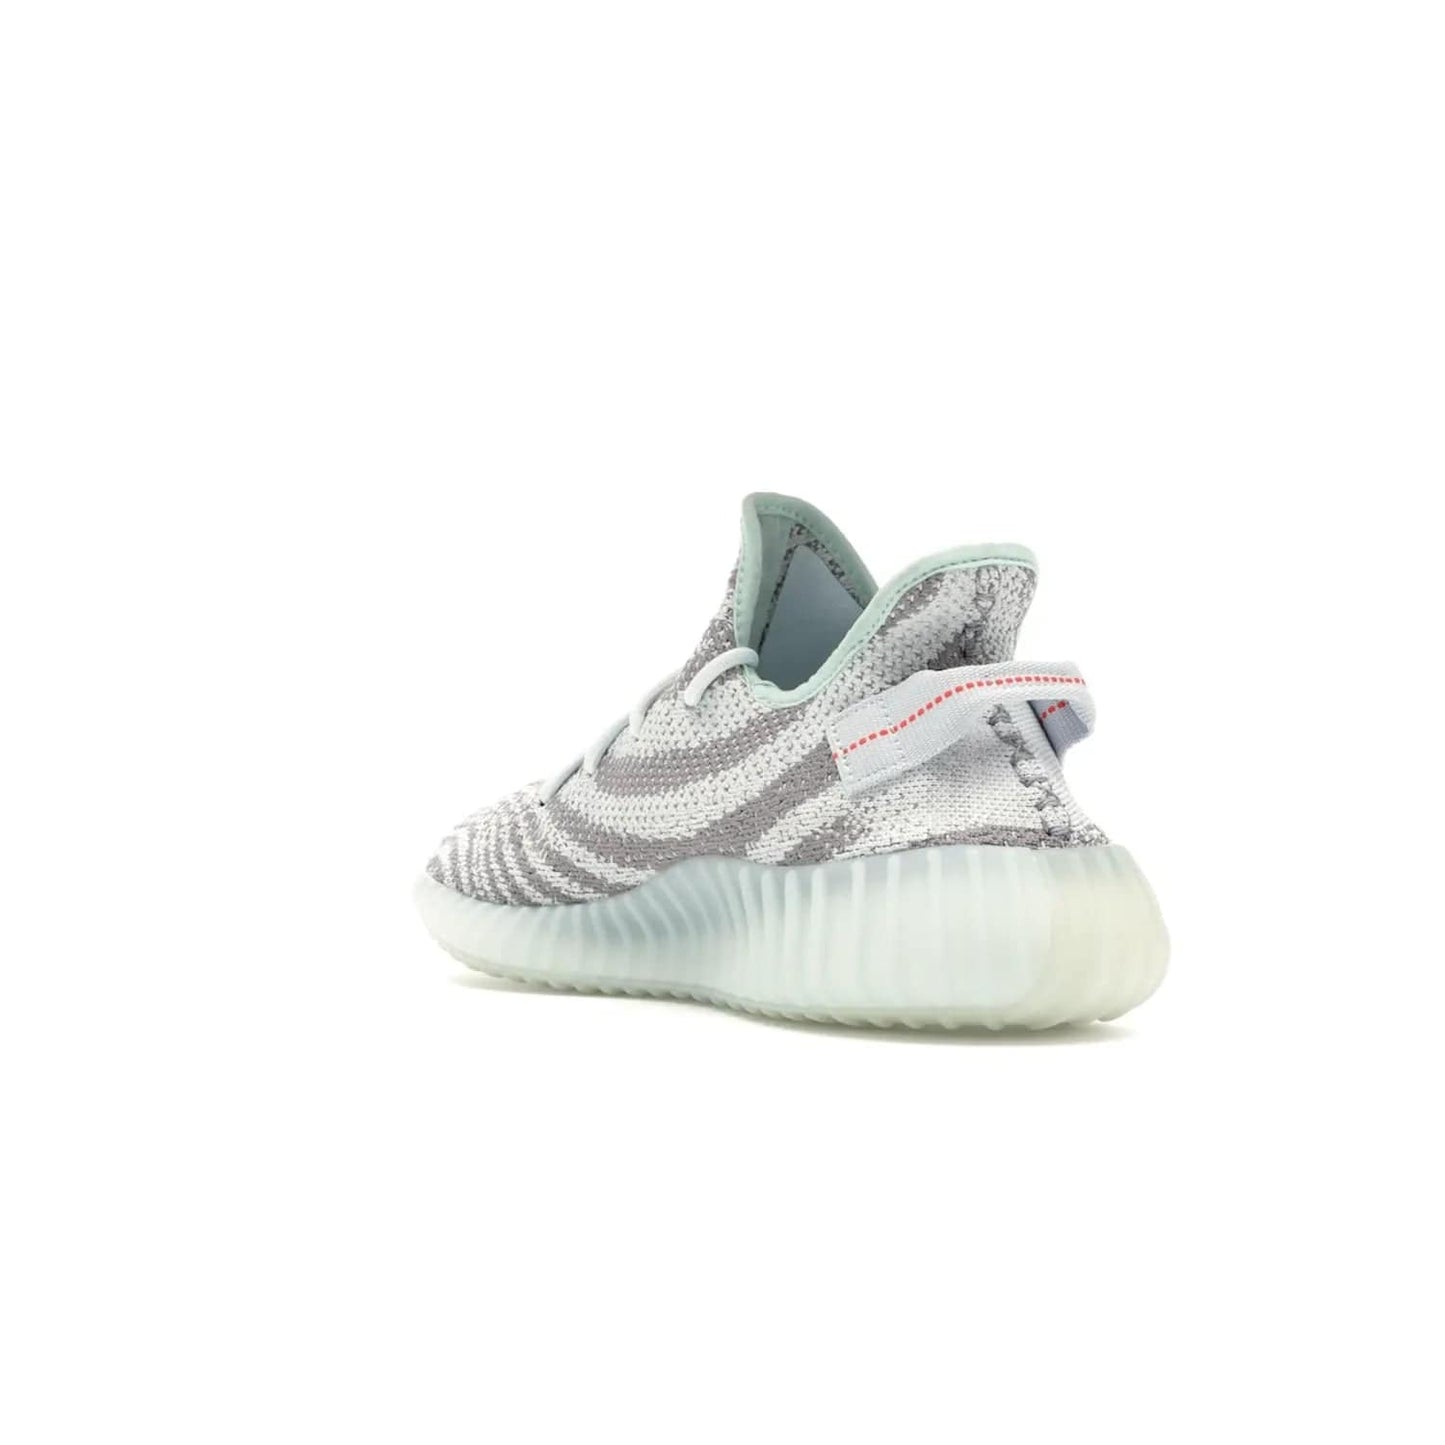 adidas Yeezy Boost 350 V2 Blue Tint - Image 25 - Only at www.BallersClubKickz.com - The adidas Yeezy Boost 350 V2 Blue Tint merges fashion and functionality with its Primeknit upper and Boost sole. Released in December 2017, this luxurious sneaker is perfect for making a stylish statement.